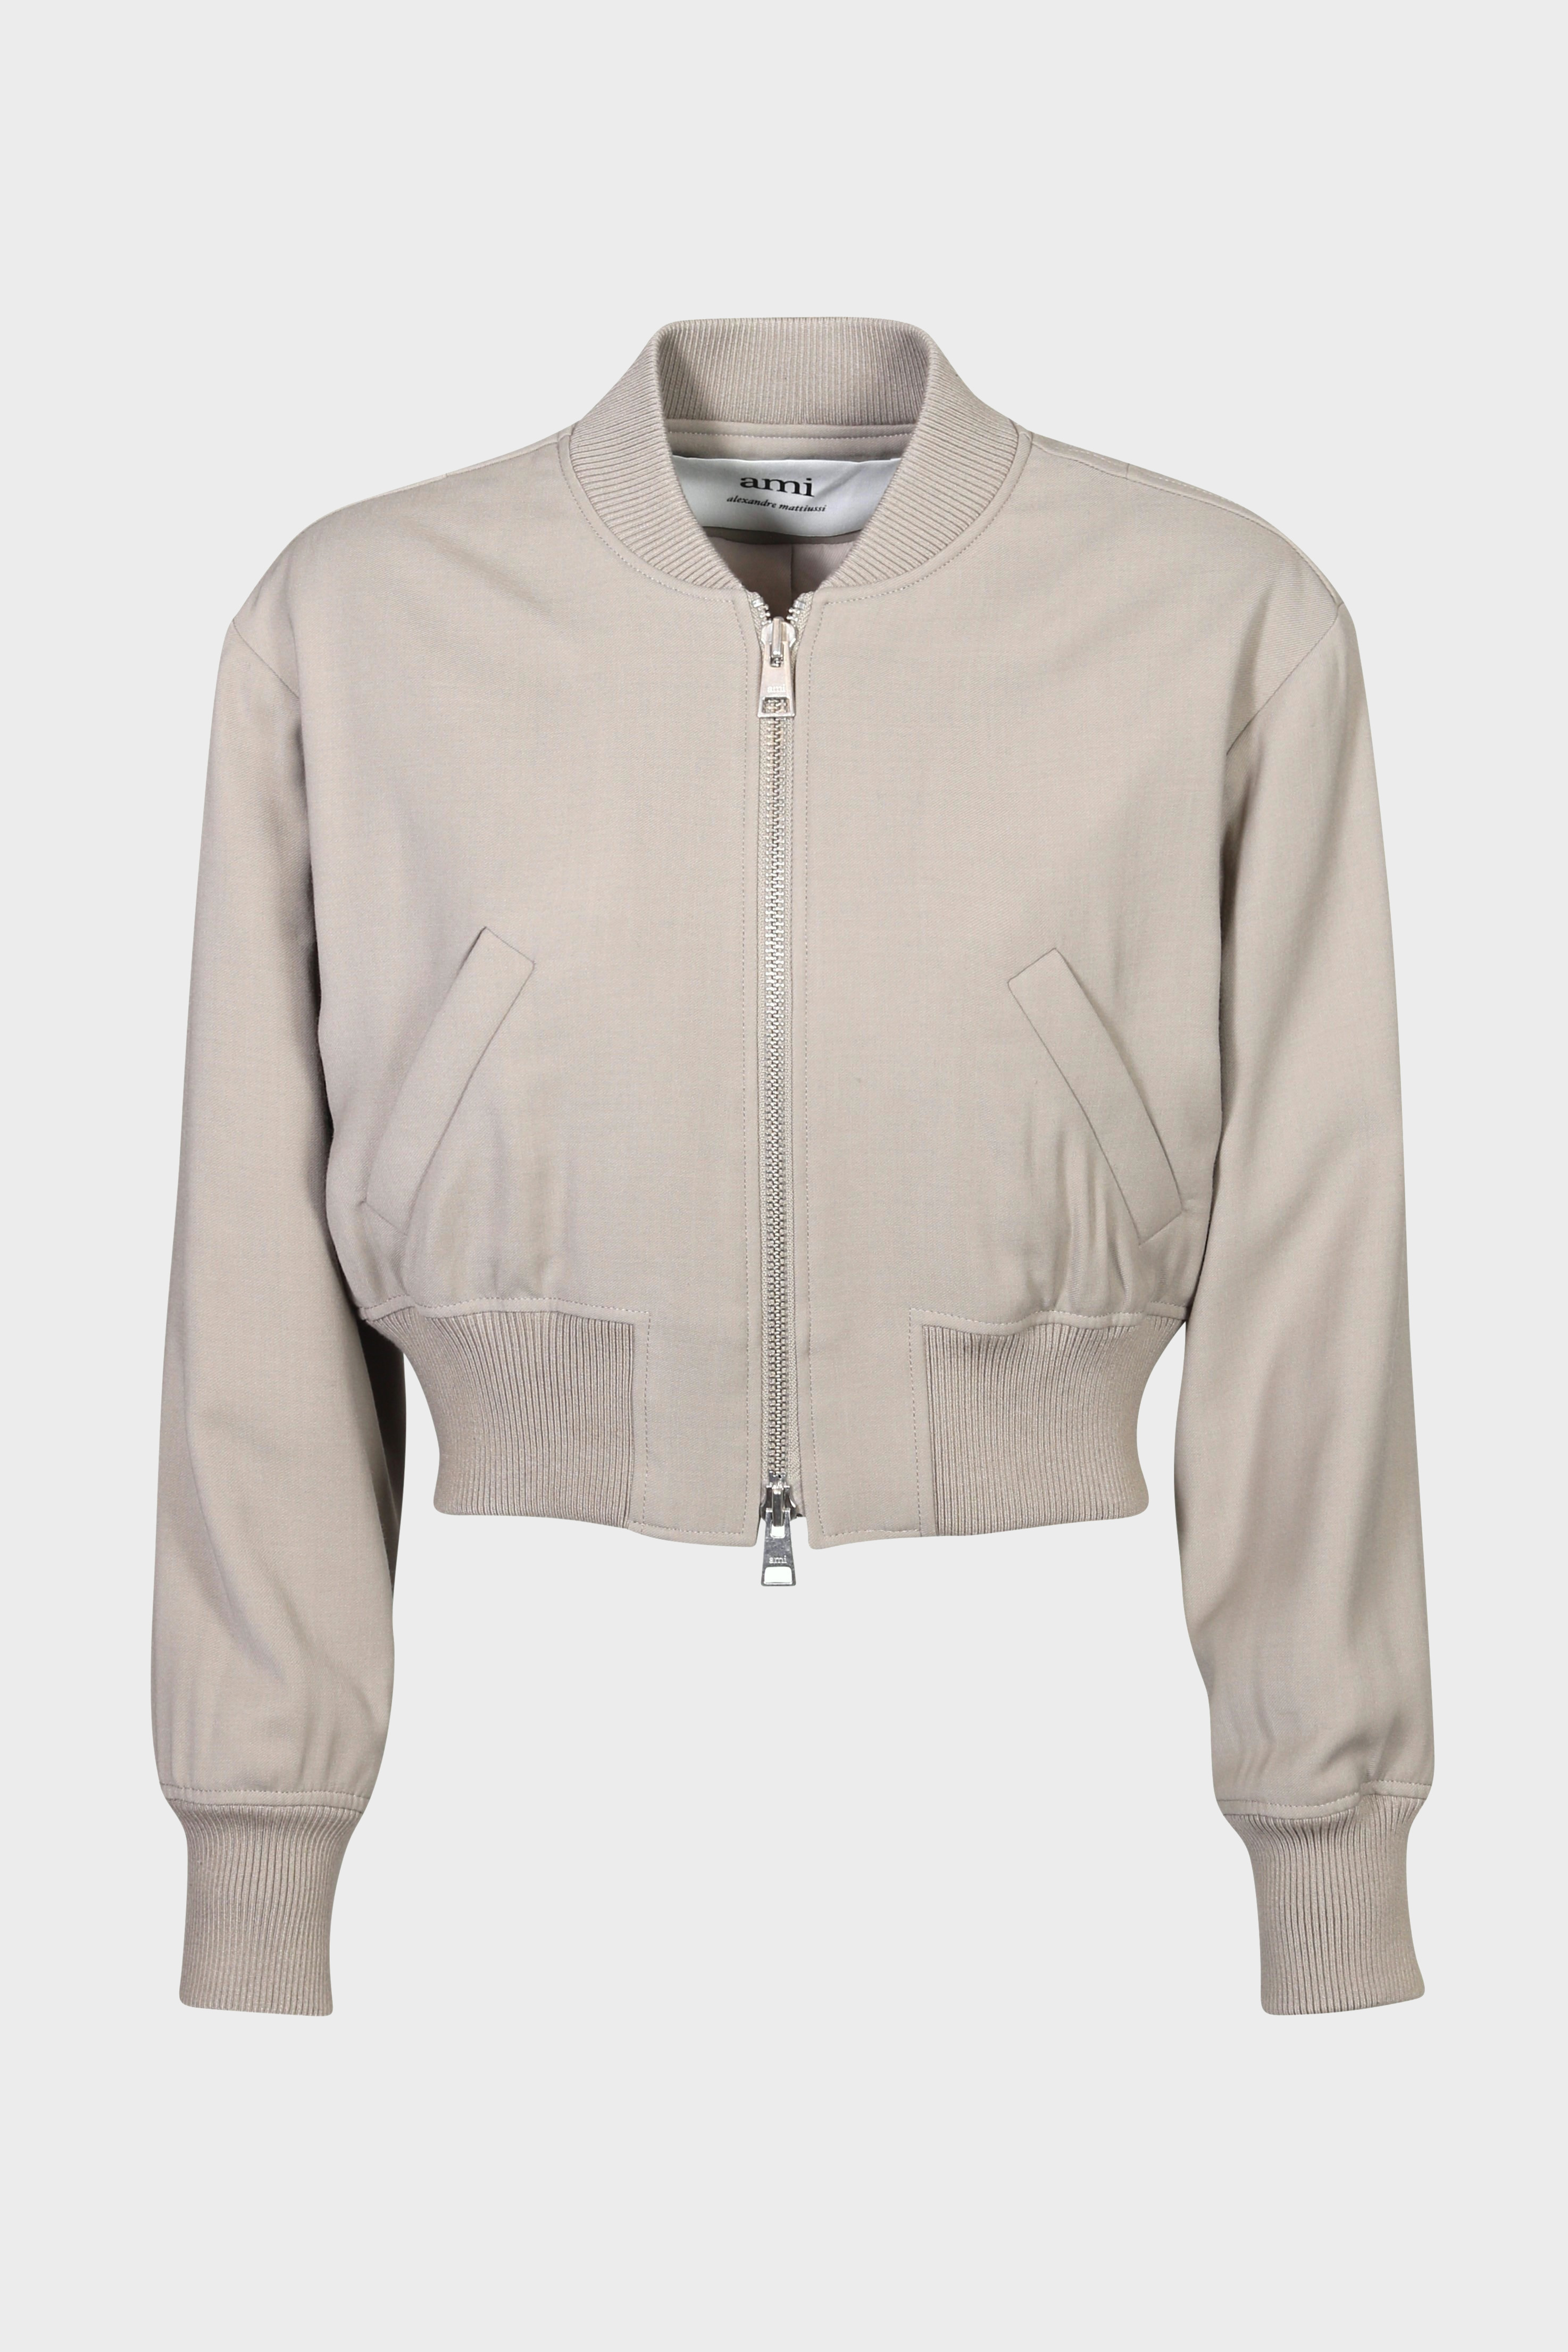 AMI PARIS Bomber Jacket in Light Taupe L